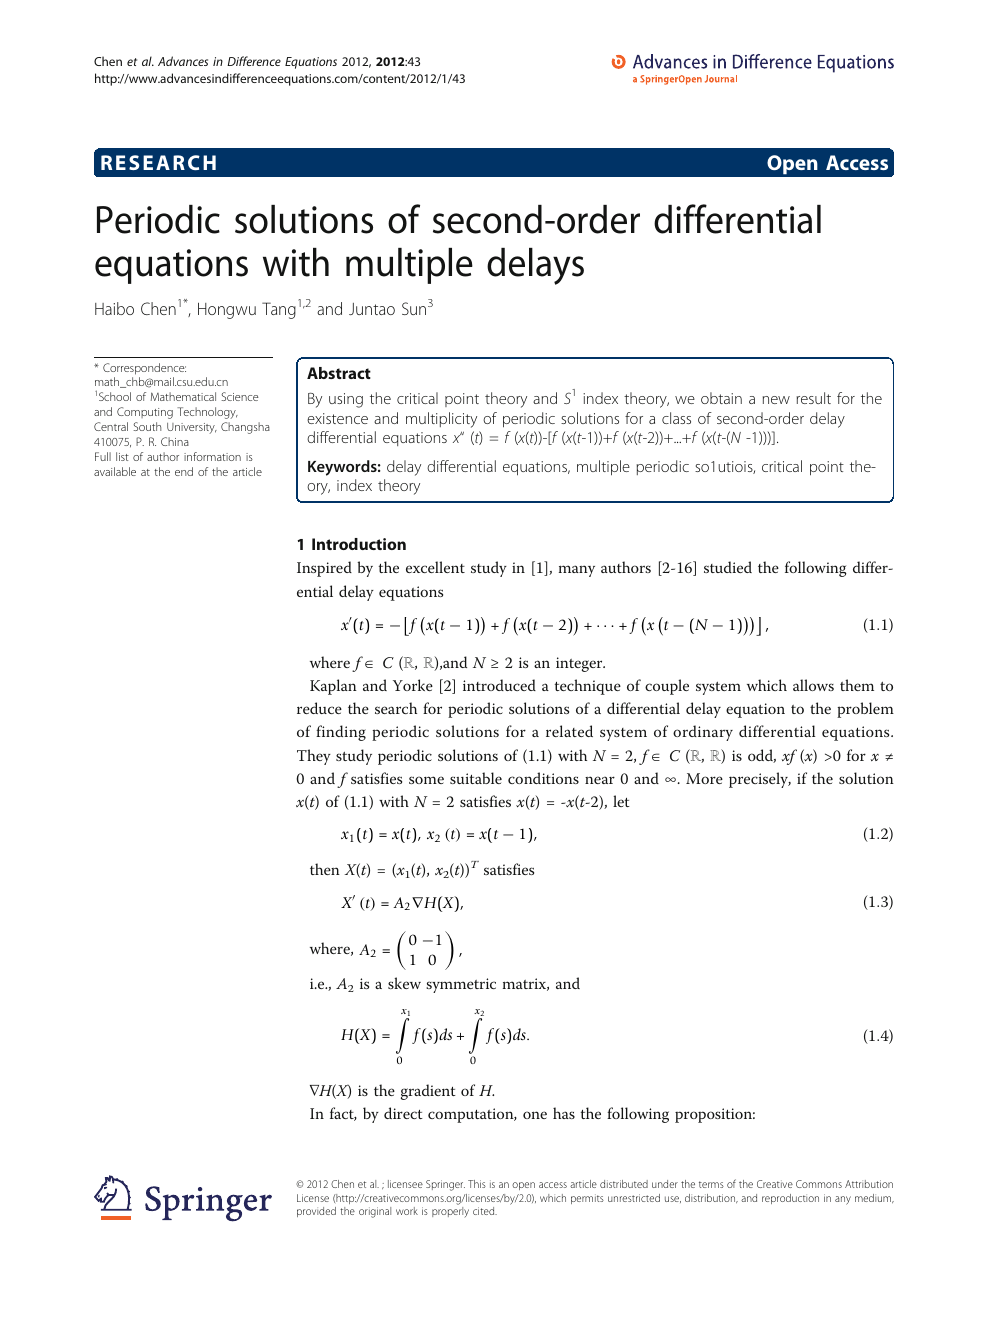 Periodic Solutions Of Second Order Differential Equations With Multiple Delays Topic Of Research Paper In Mathematics Download Scholarly Article Pdf And Read For Free On Cyberleninka Open Science Hub